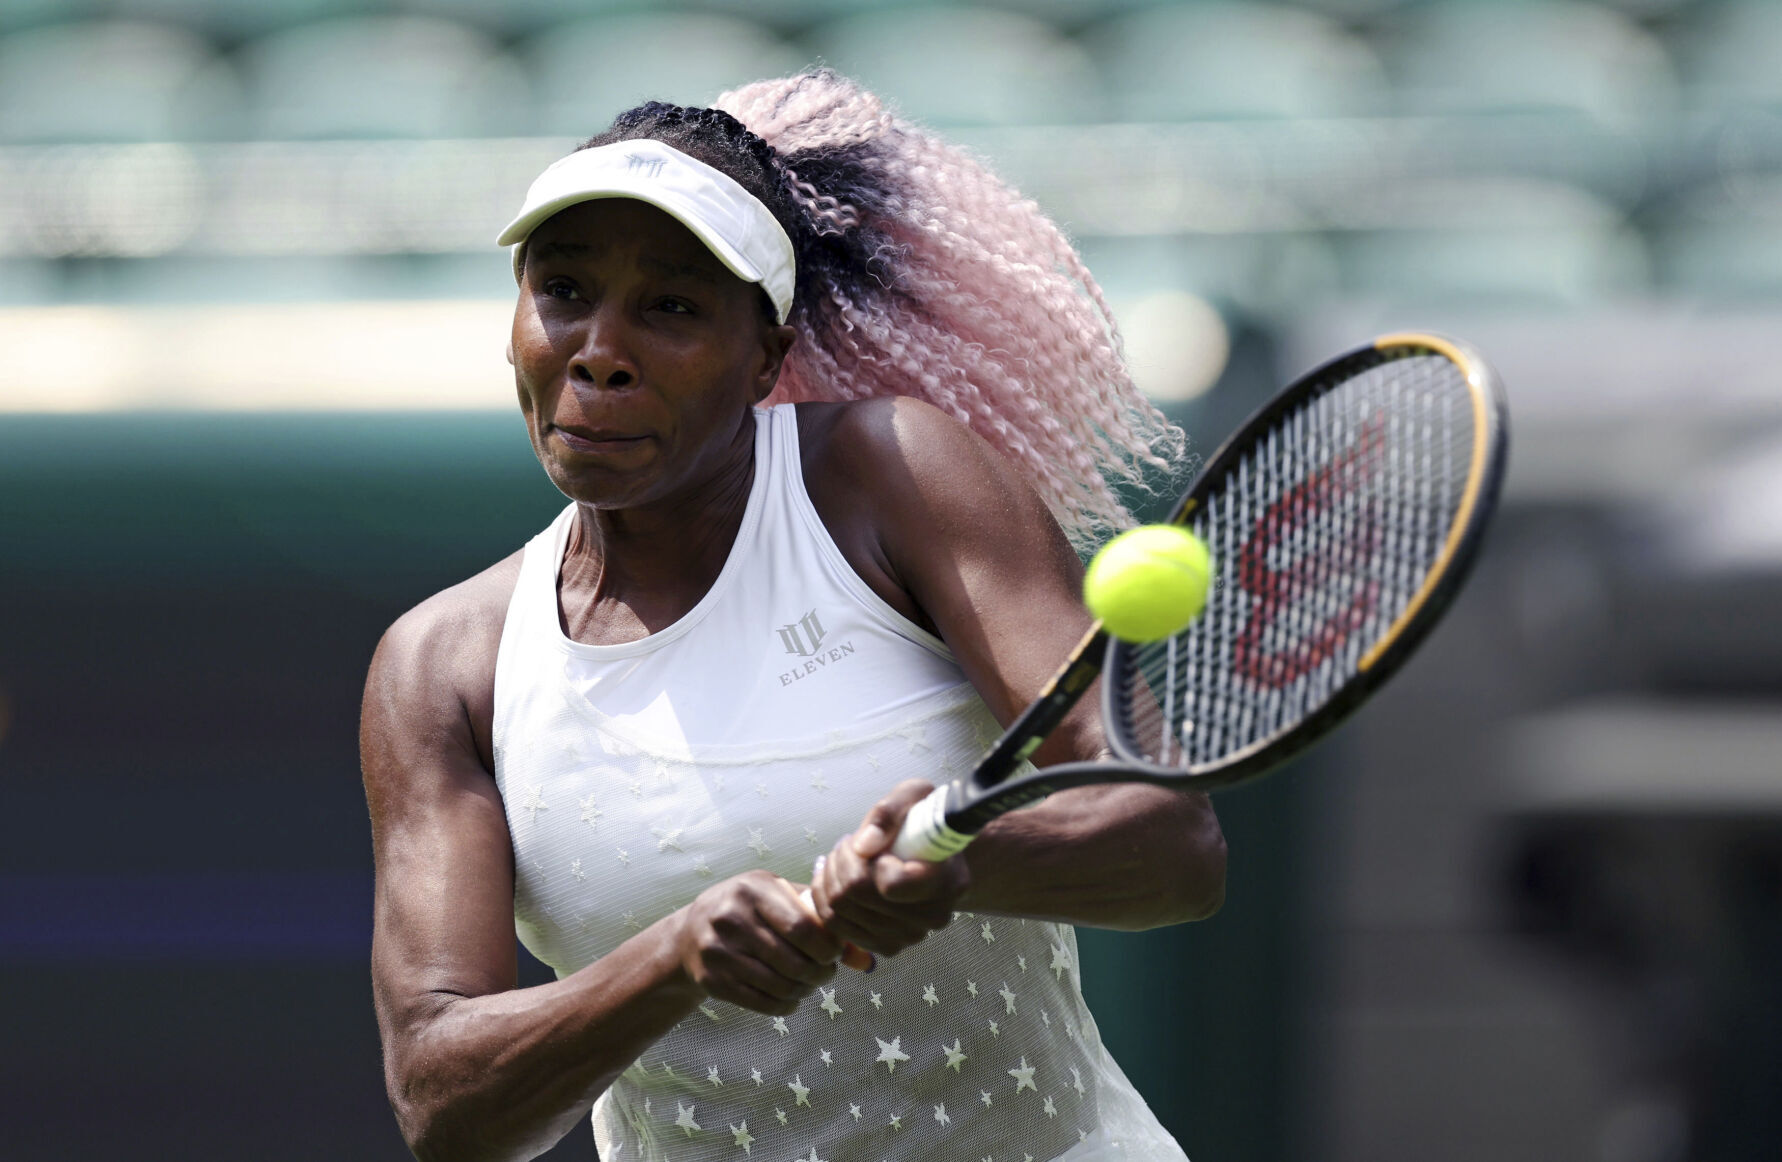 Venus Williams back at Wimbledon, ready for Centre Court